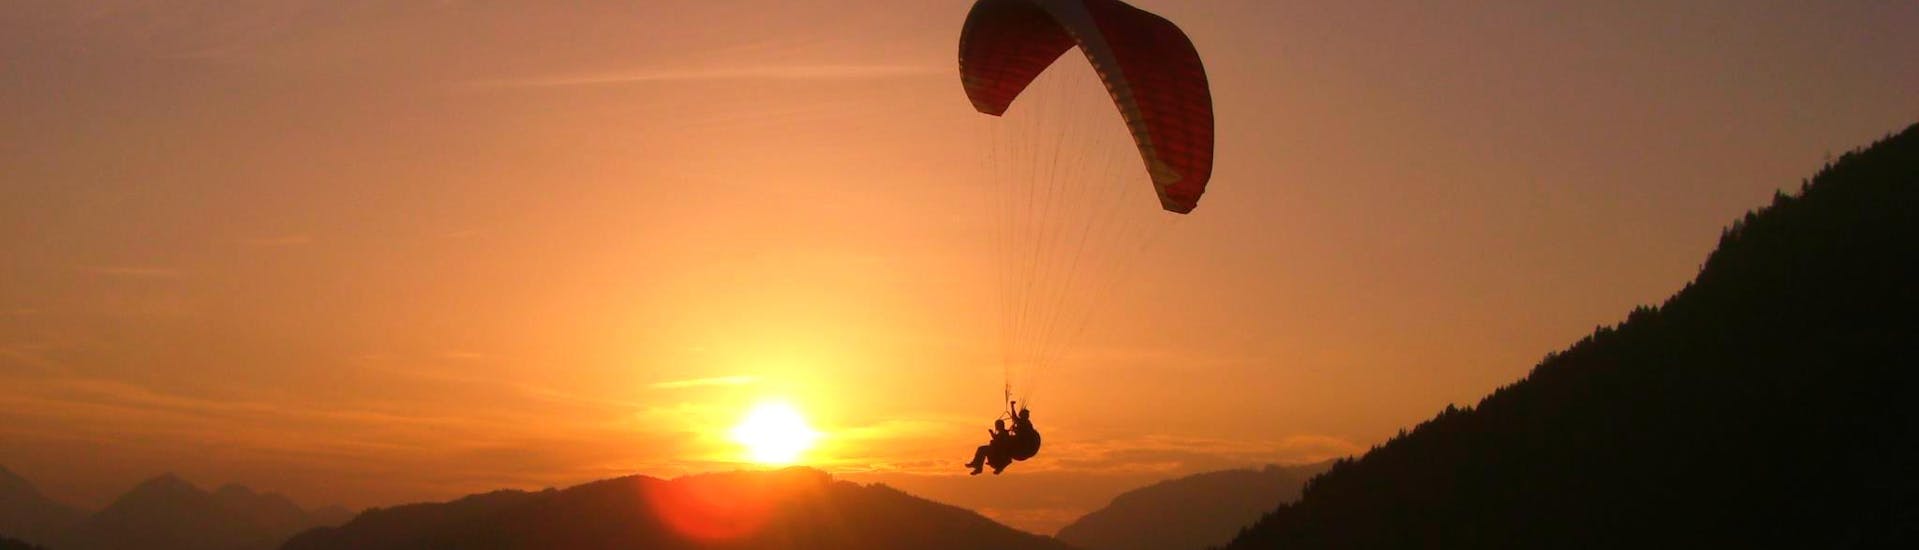 Sunset photo while tandem paragliding from Gerlitzen